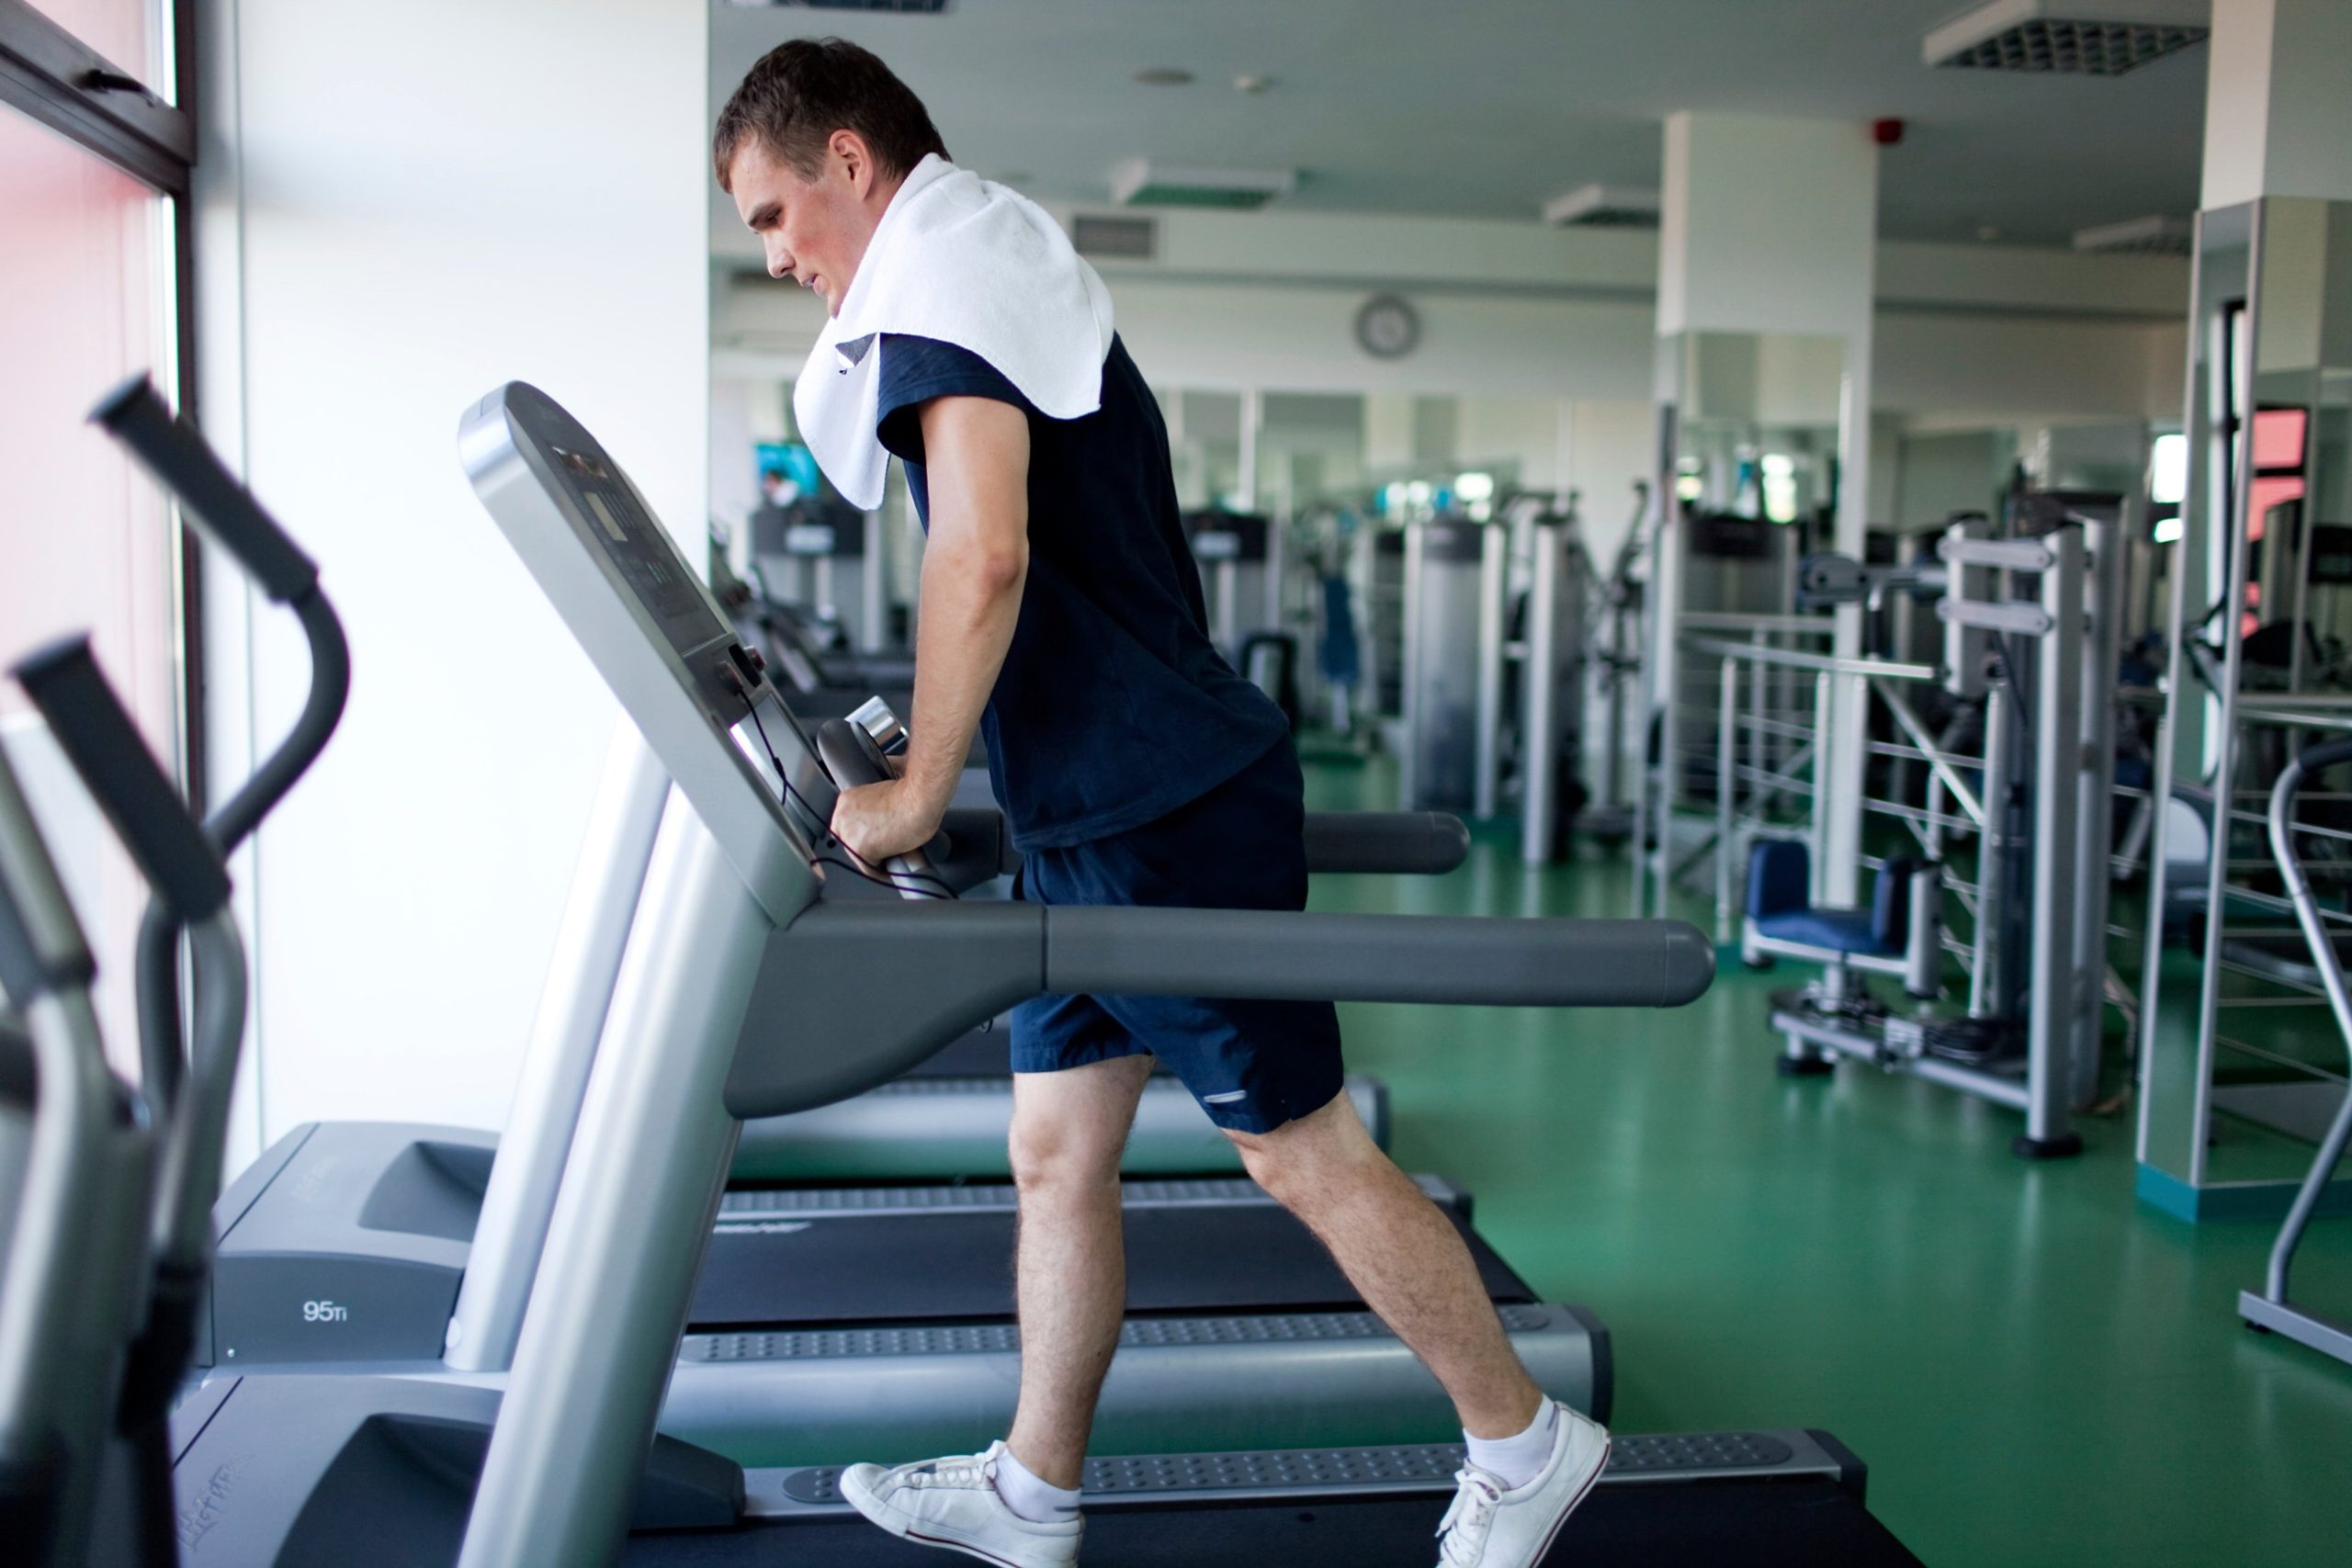 Treadmill Safety Tips – Get in Shape Without Accidents and Injuries